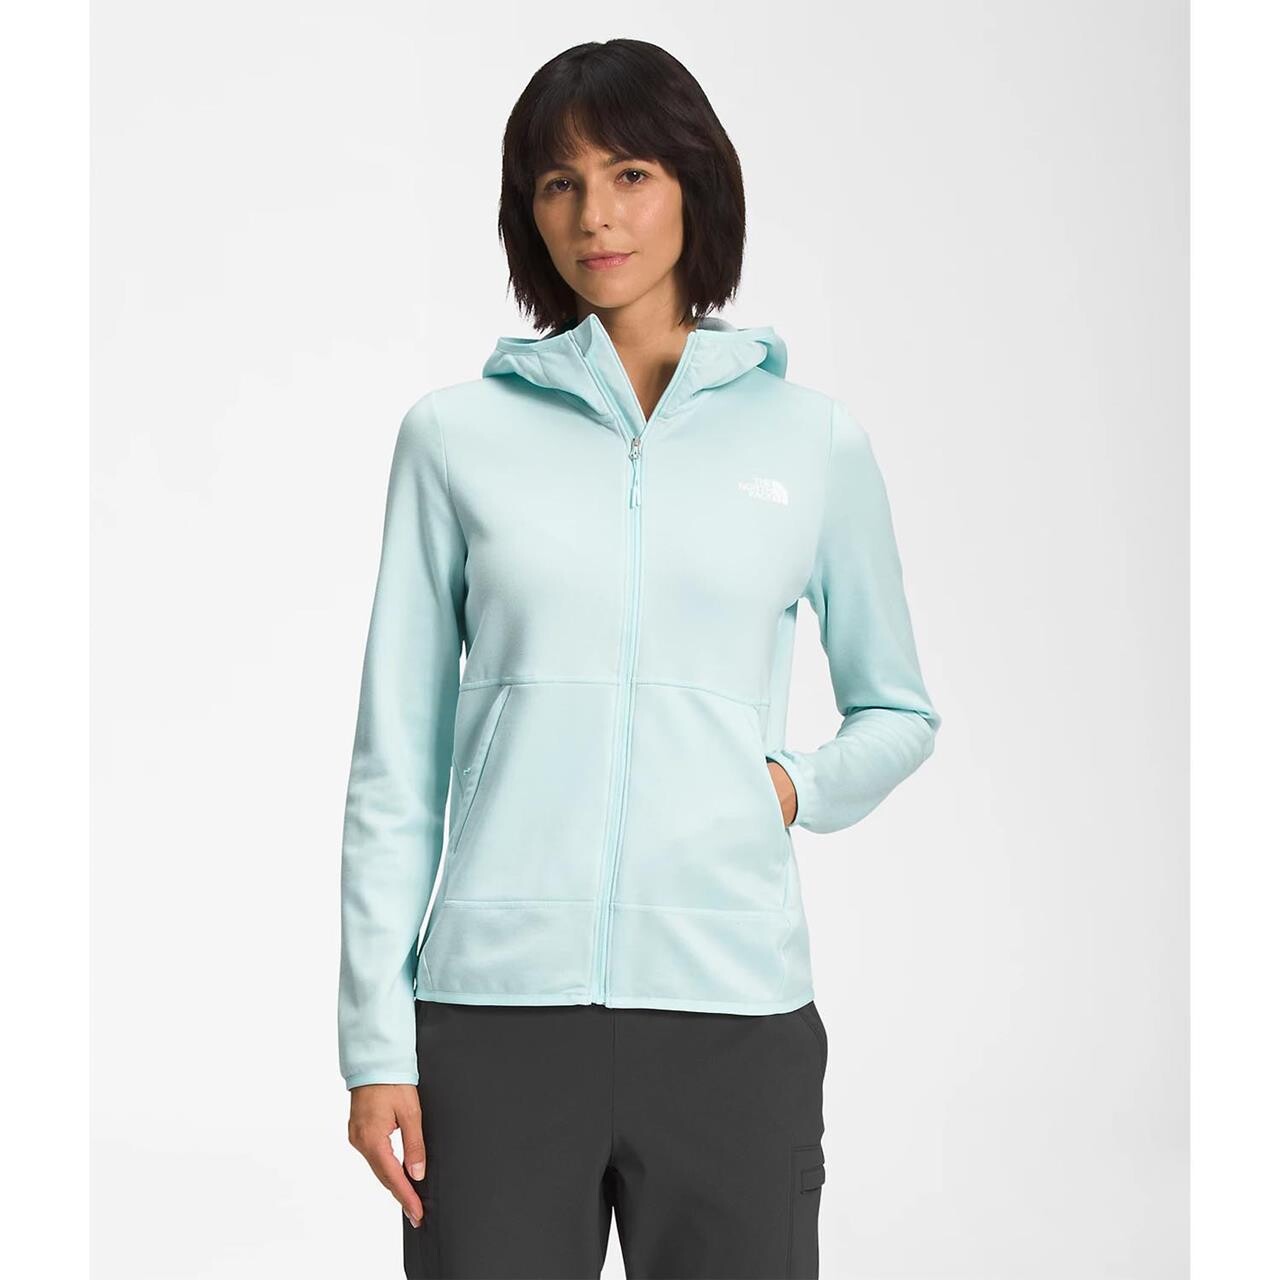 Se The North Face Womens Canyonlands Hoodie (Blå (SKYLIGHT BLUE WHITE HEATHER) Small) hos Friluftsland.dk